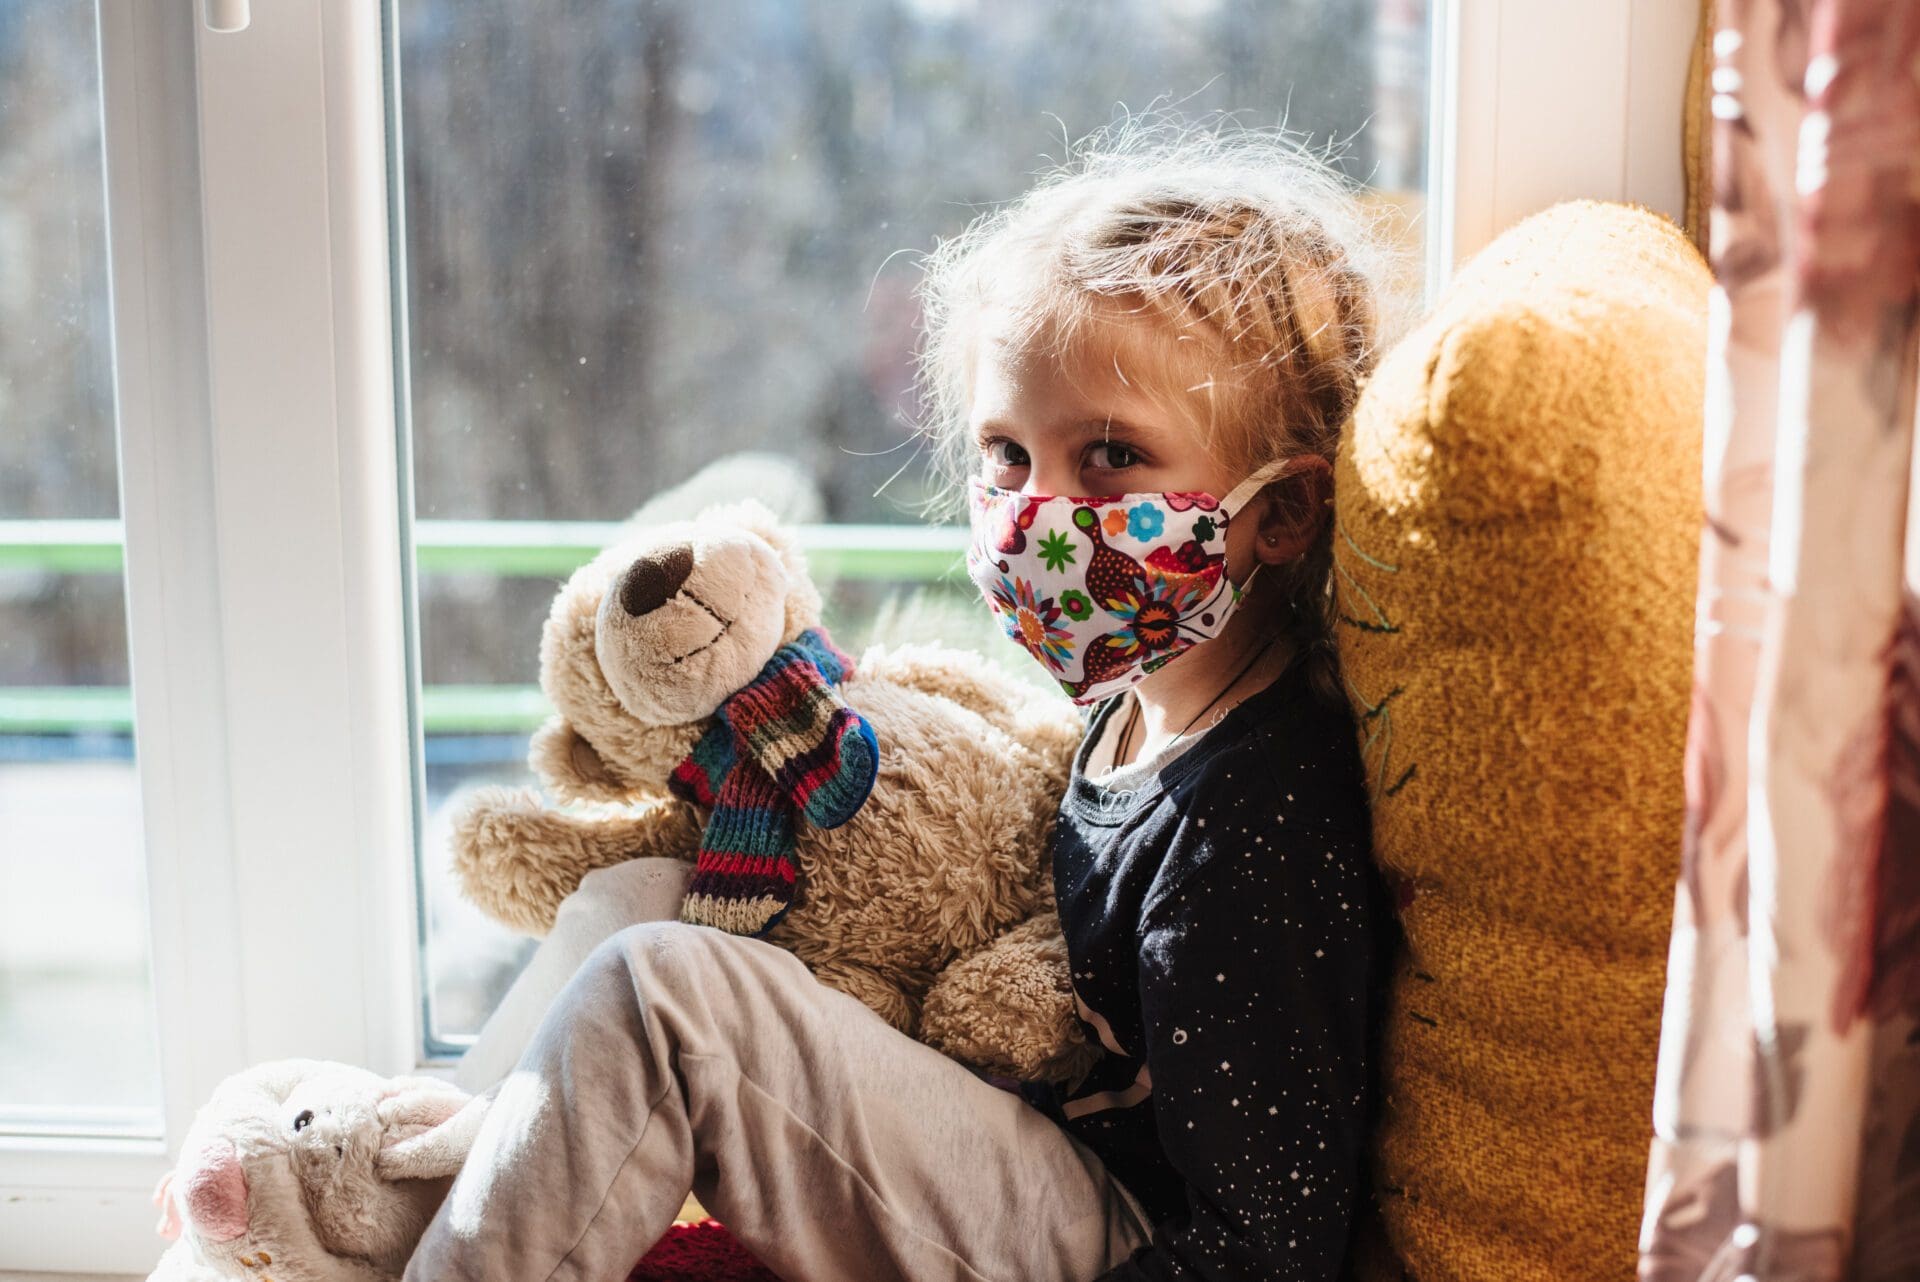 A little girl wearing a face mask sitting on a window sill with a teddy bear.